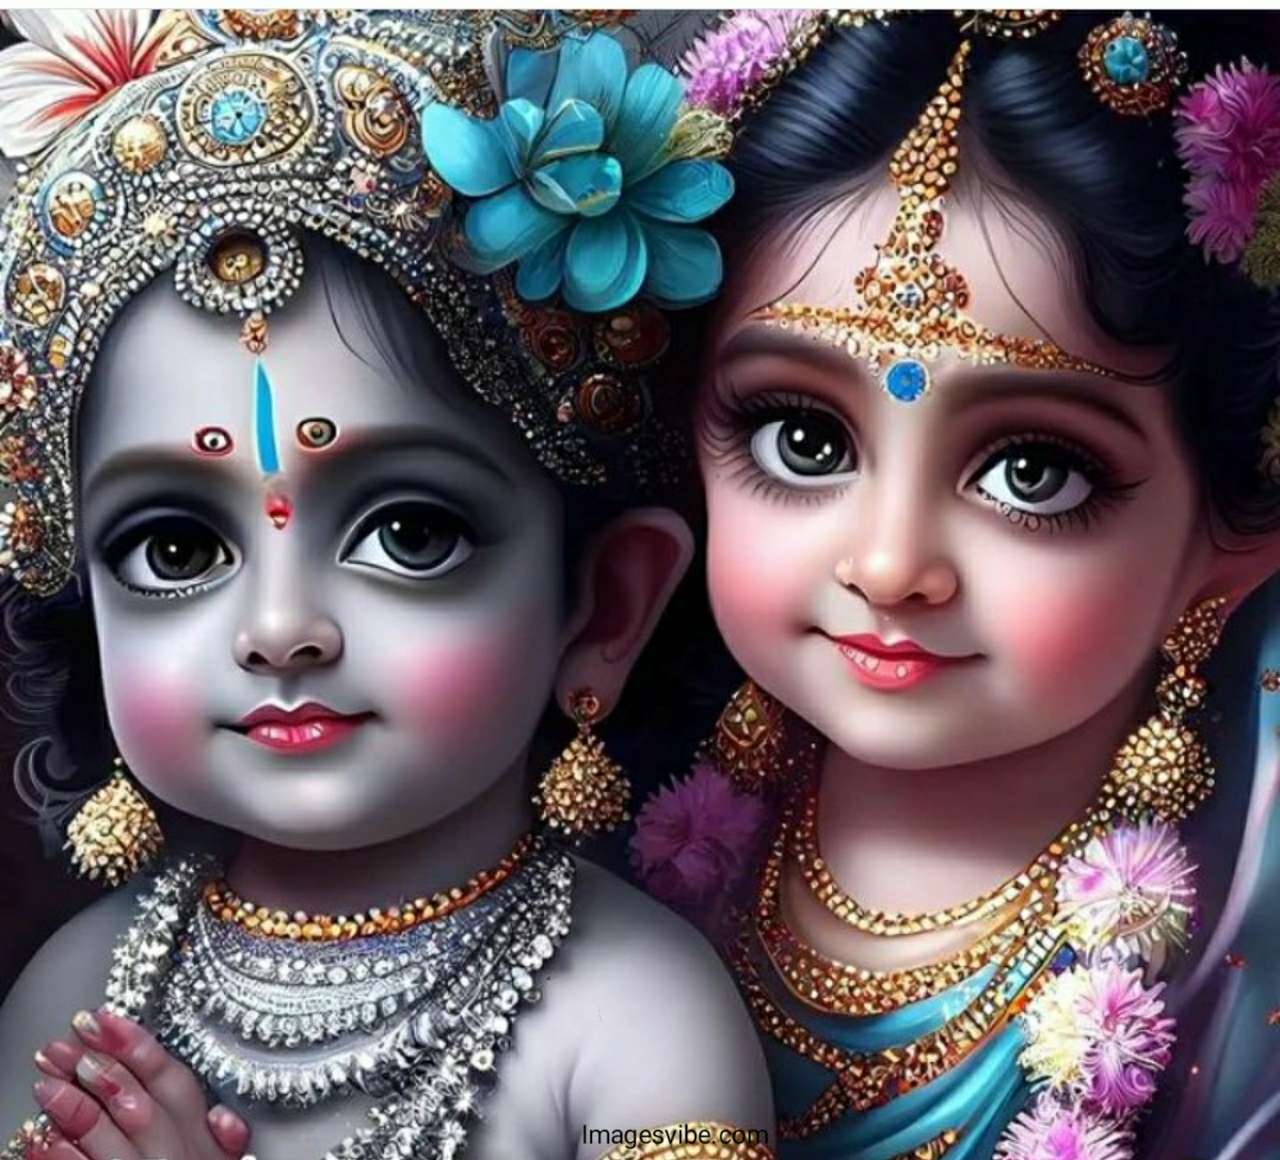 Download over 999+ stunning Radha Krishna images – An incredible collection of full 4K Radha Krishna images for download